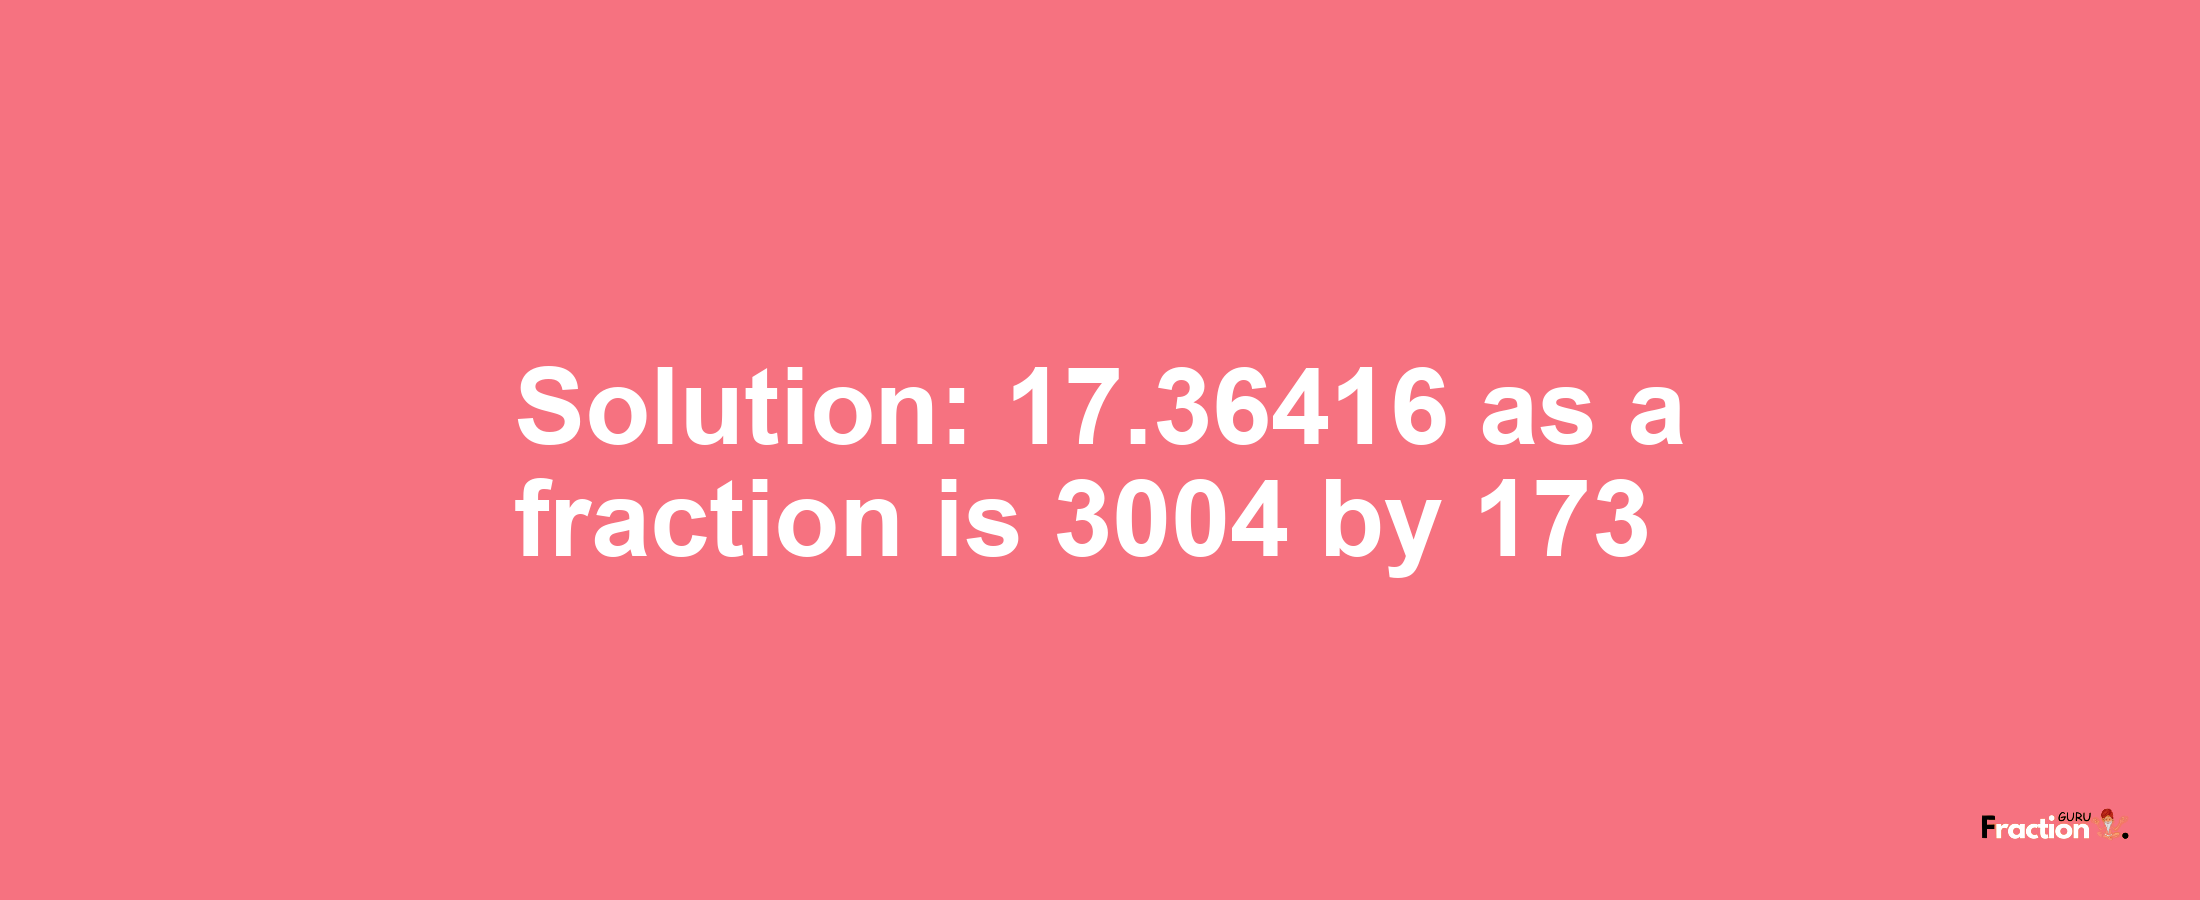 Solution:17.36416 as a fraction is 3004/173